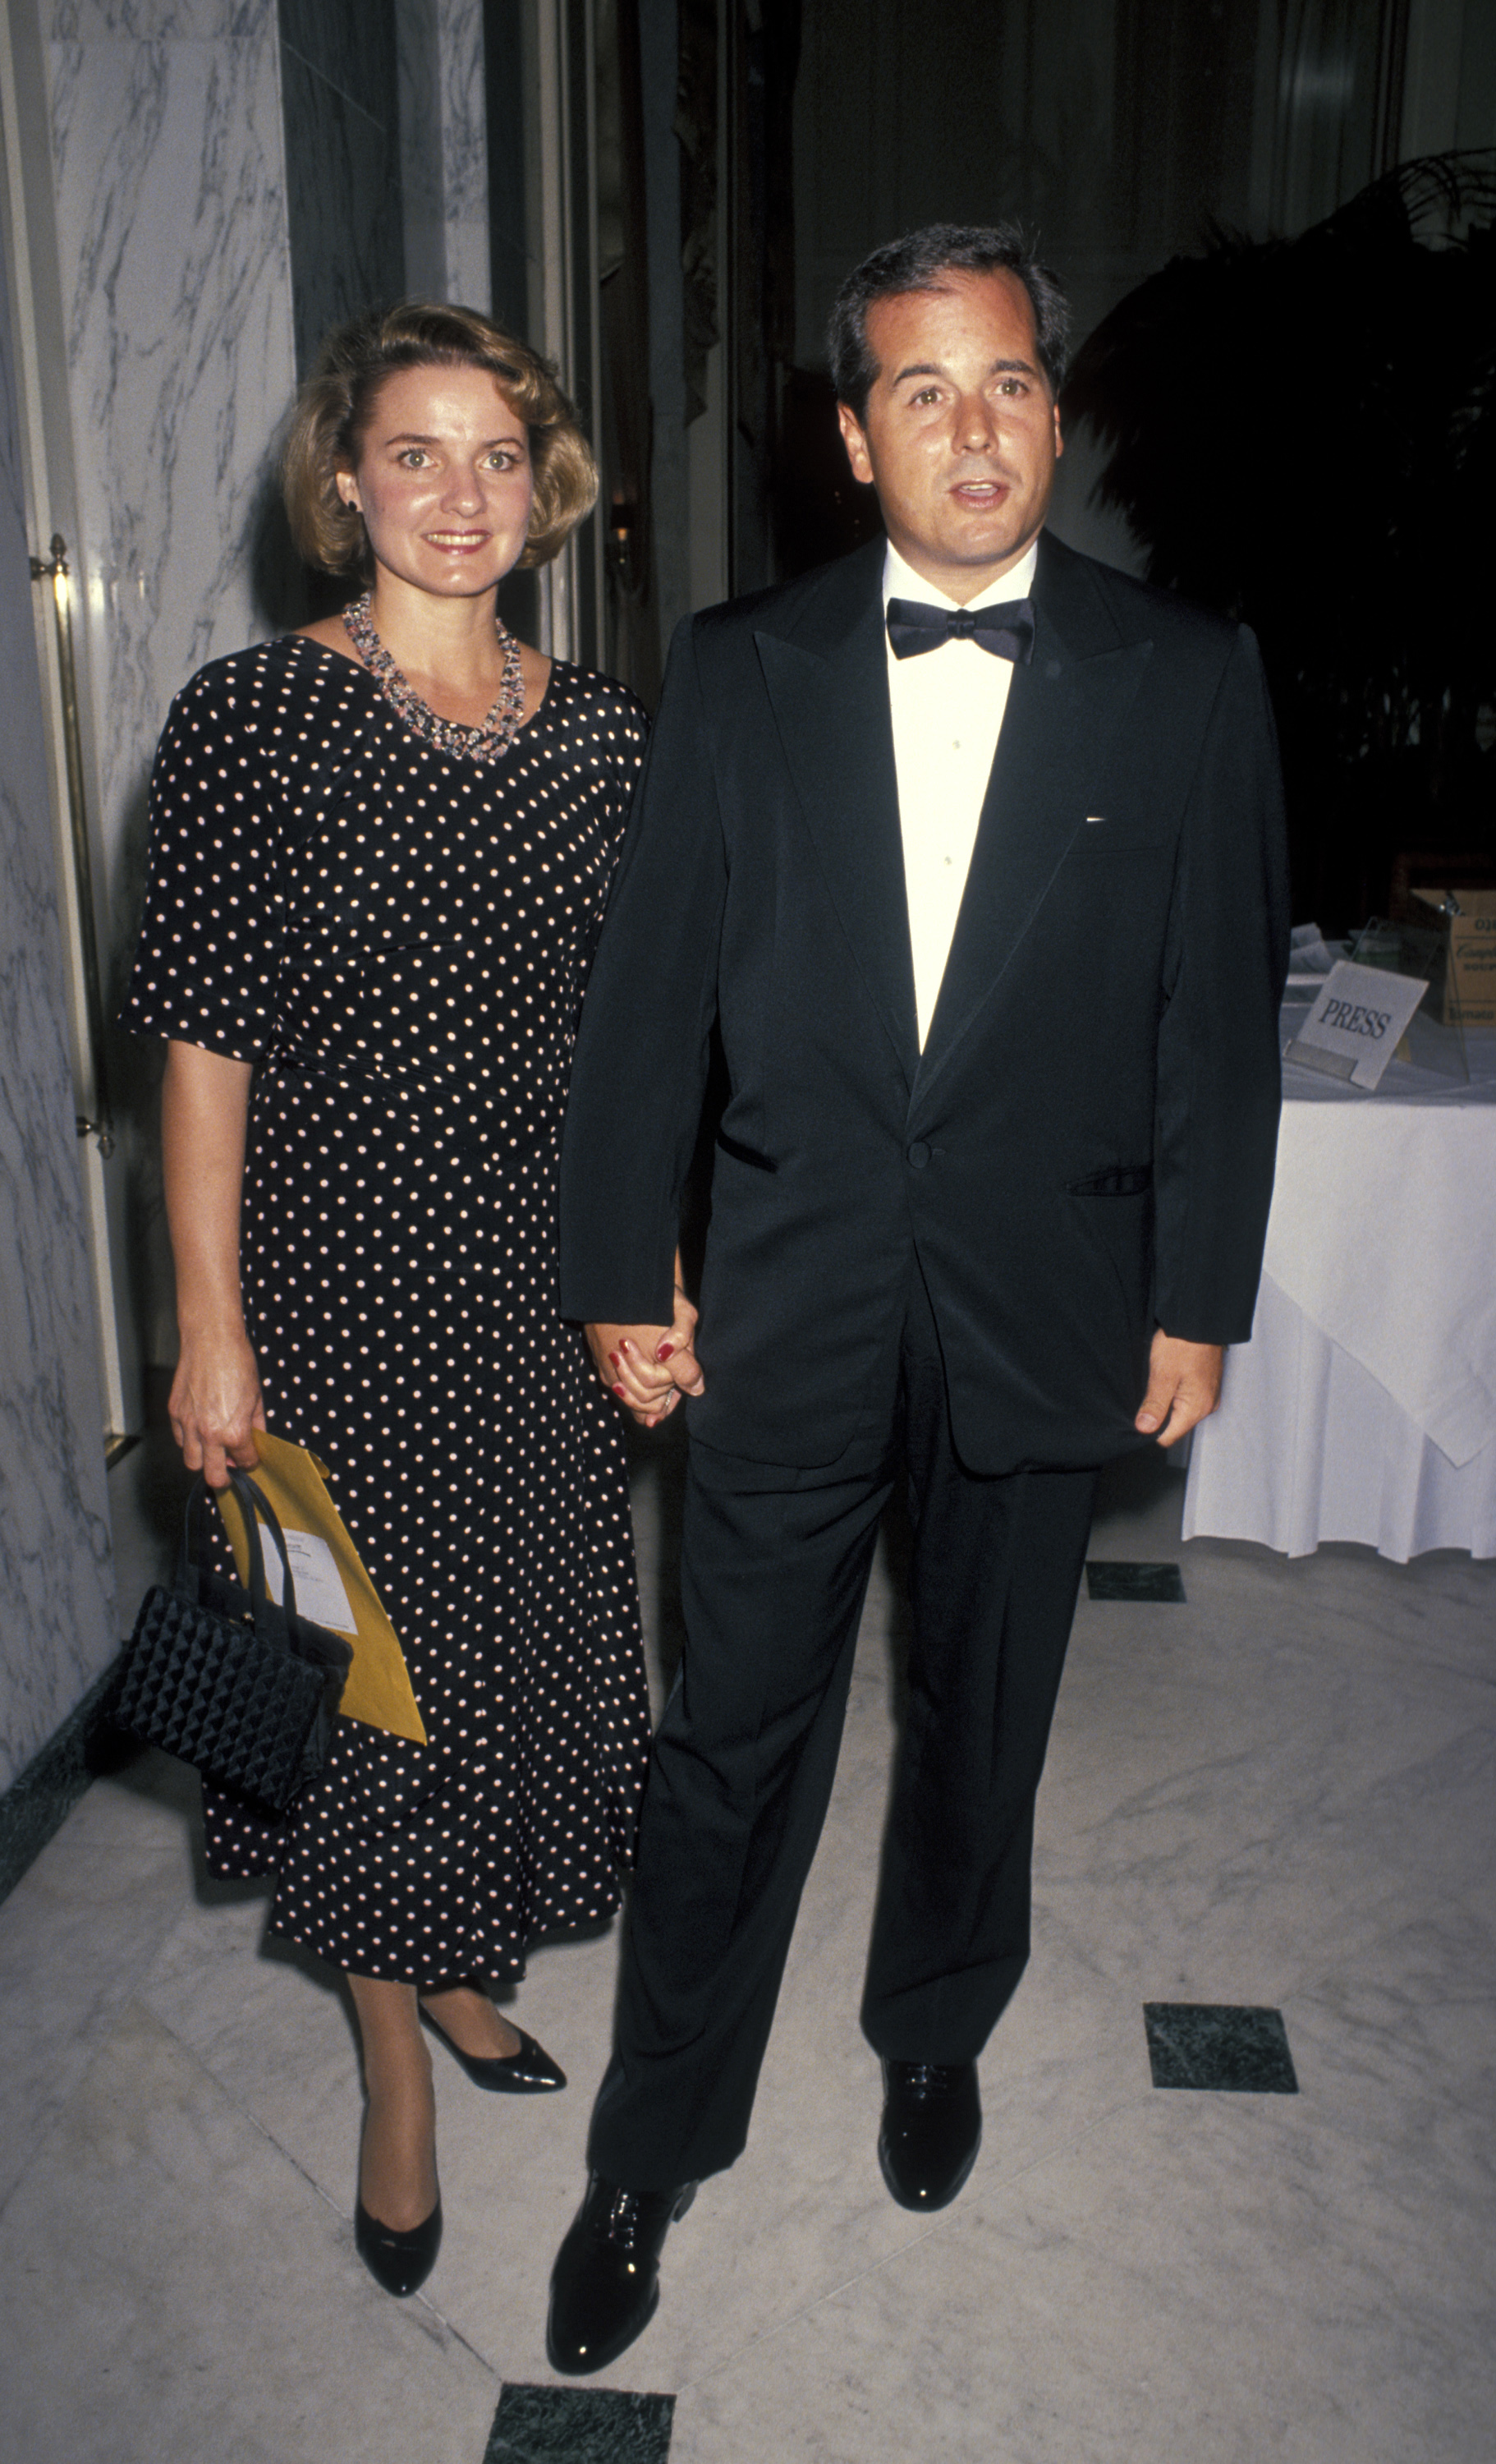 Amy Arnaz and Desi Arnaz Jr. during Television Academy Hall of Fame Awards, at Beverly Wilshire Hotel, in Beverly Hills, California. | Source: Getty Images